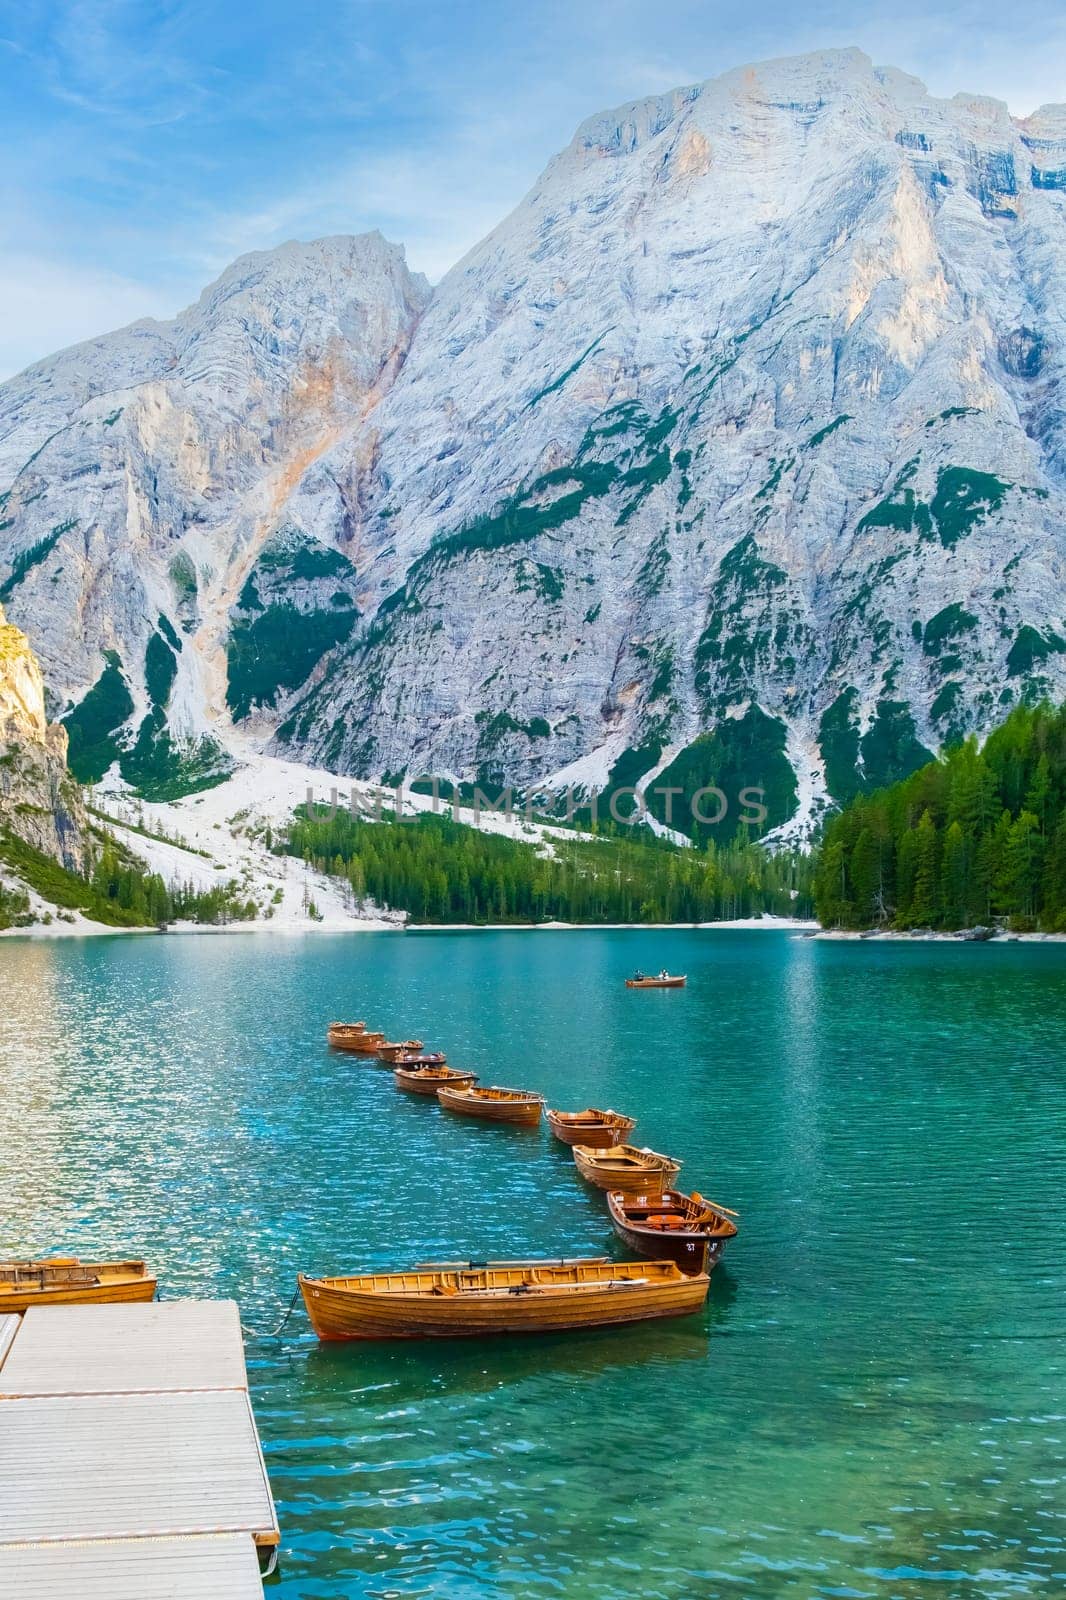 The magnificent Lake Braies with the chain of wooden boats in Dolomites Alps, Italy by vladimka